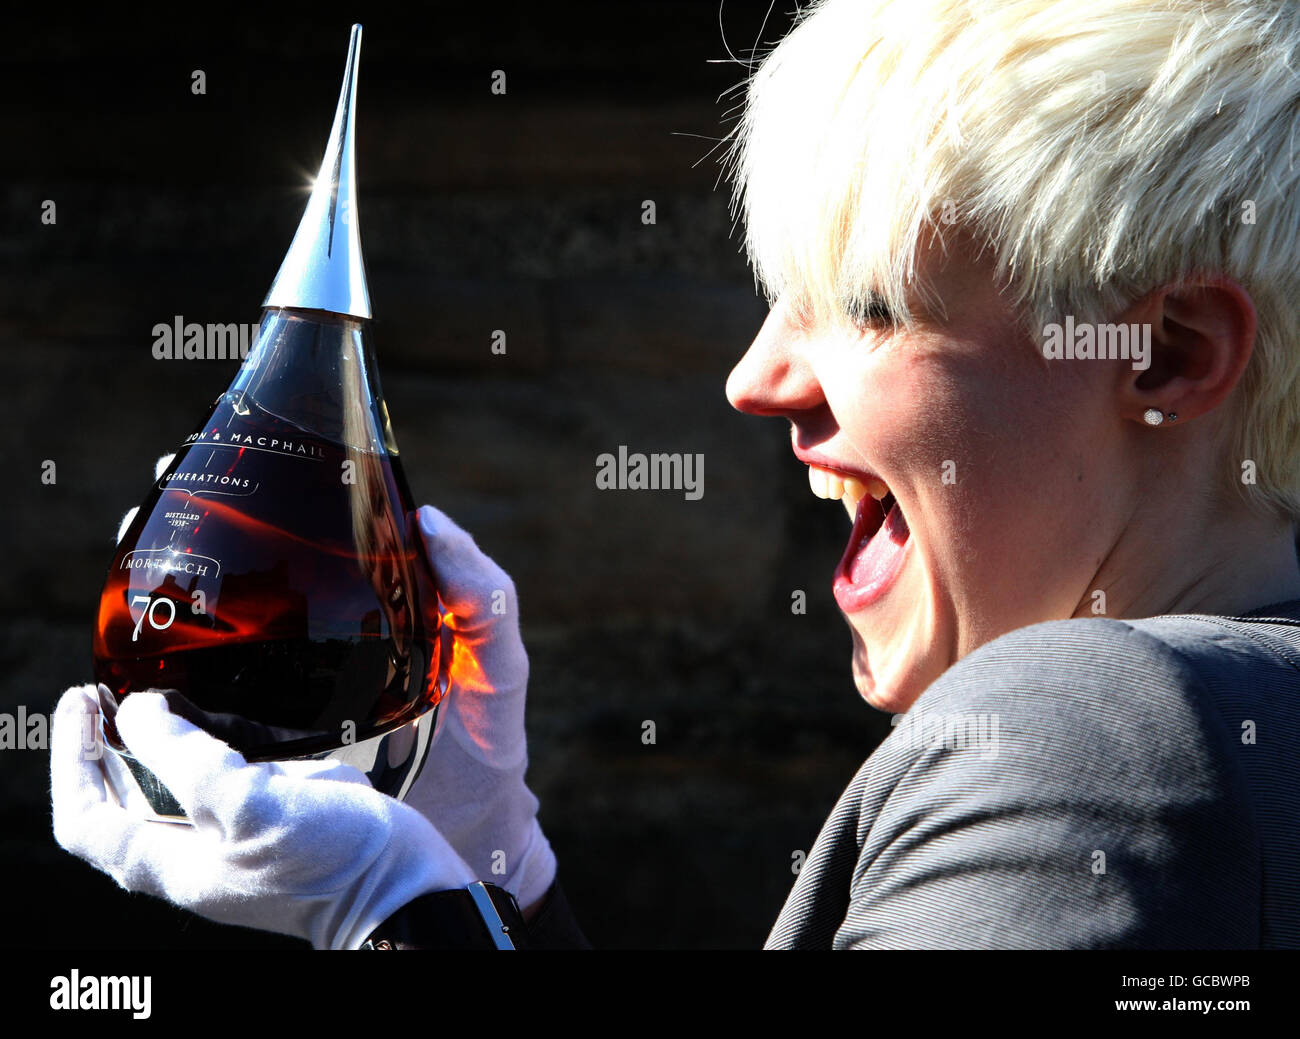 Claire Urquhart from Gordon and MacPhail holds a bottle of the world's oldest bottled single malt whisky, Mortlach 70 years old Speyside Single Malt Whisky, which has been revealed today at Edinburgh Castle by the whisky specialists. Stock Photo